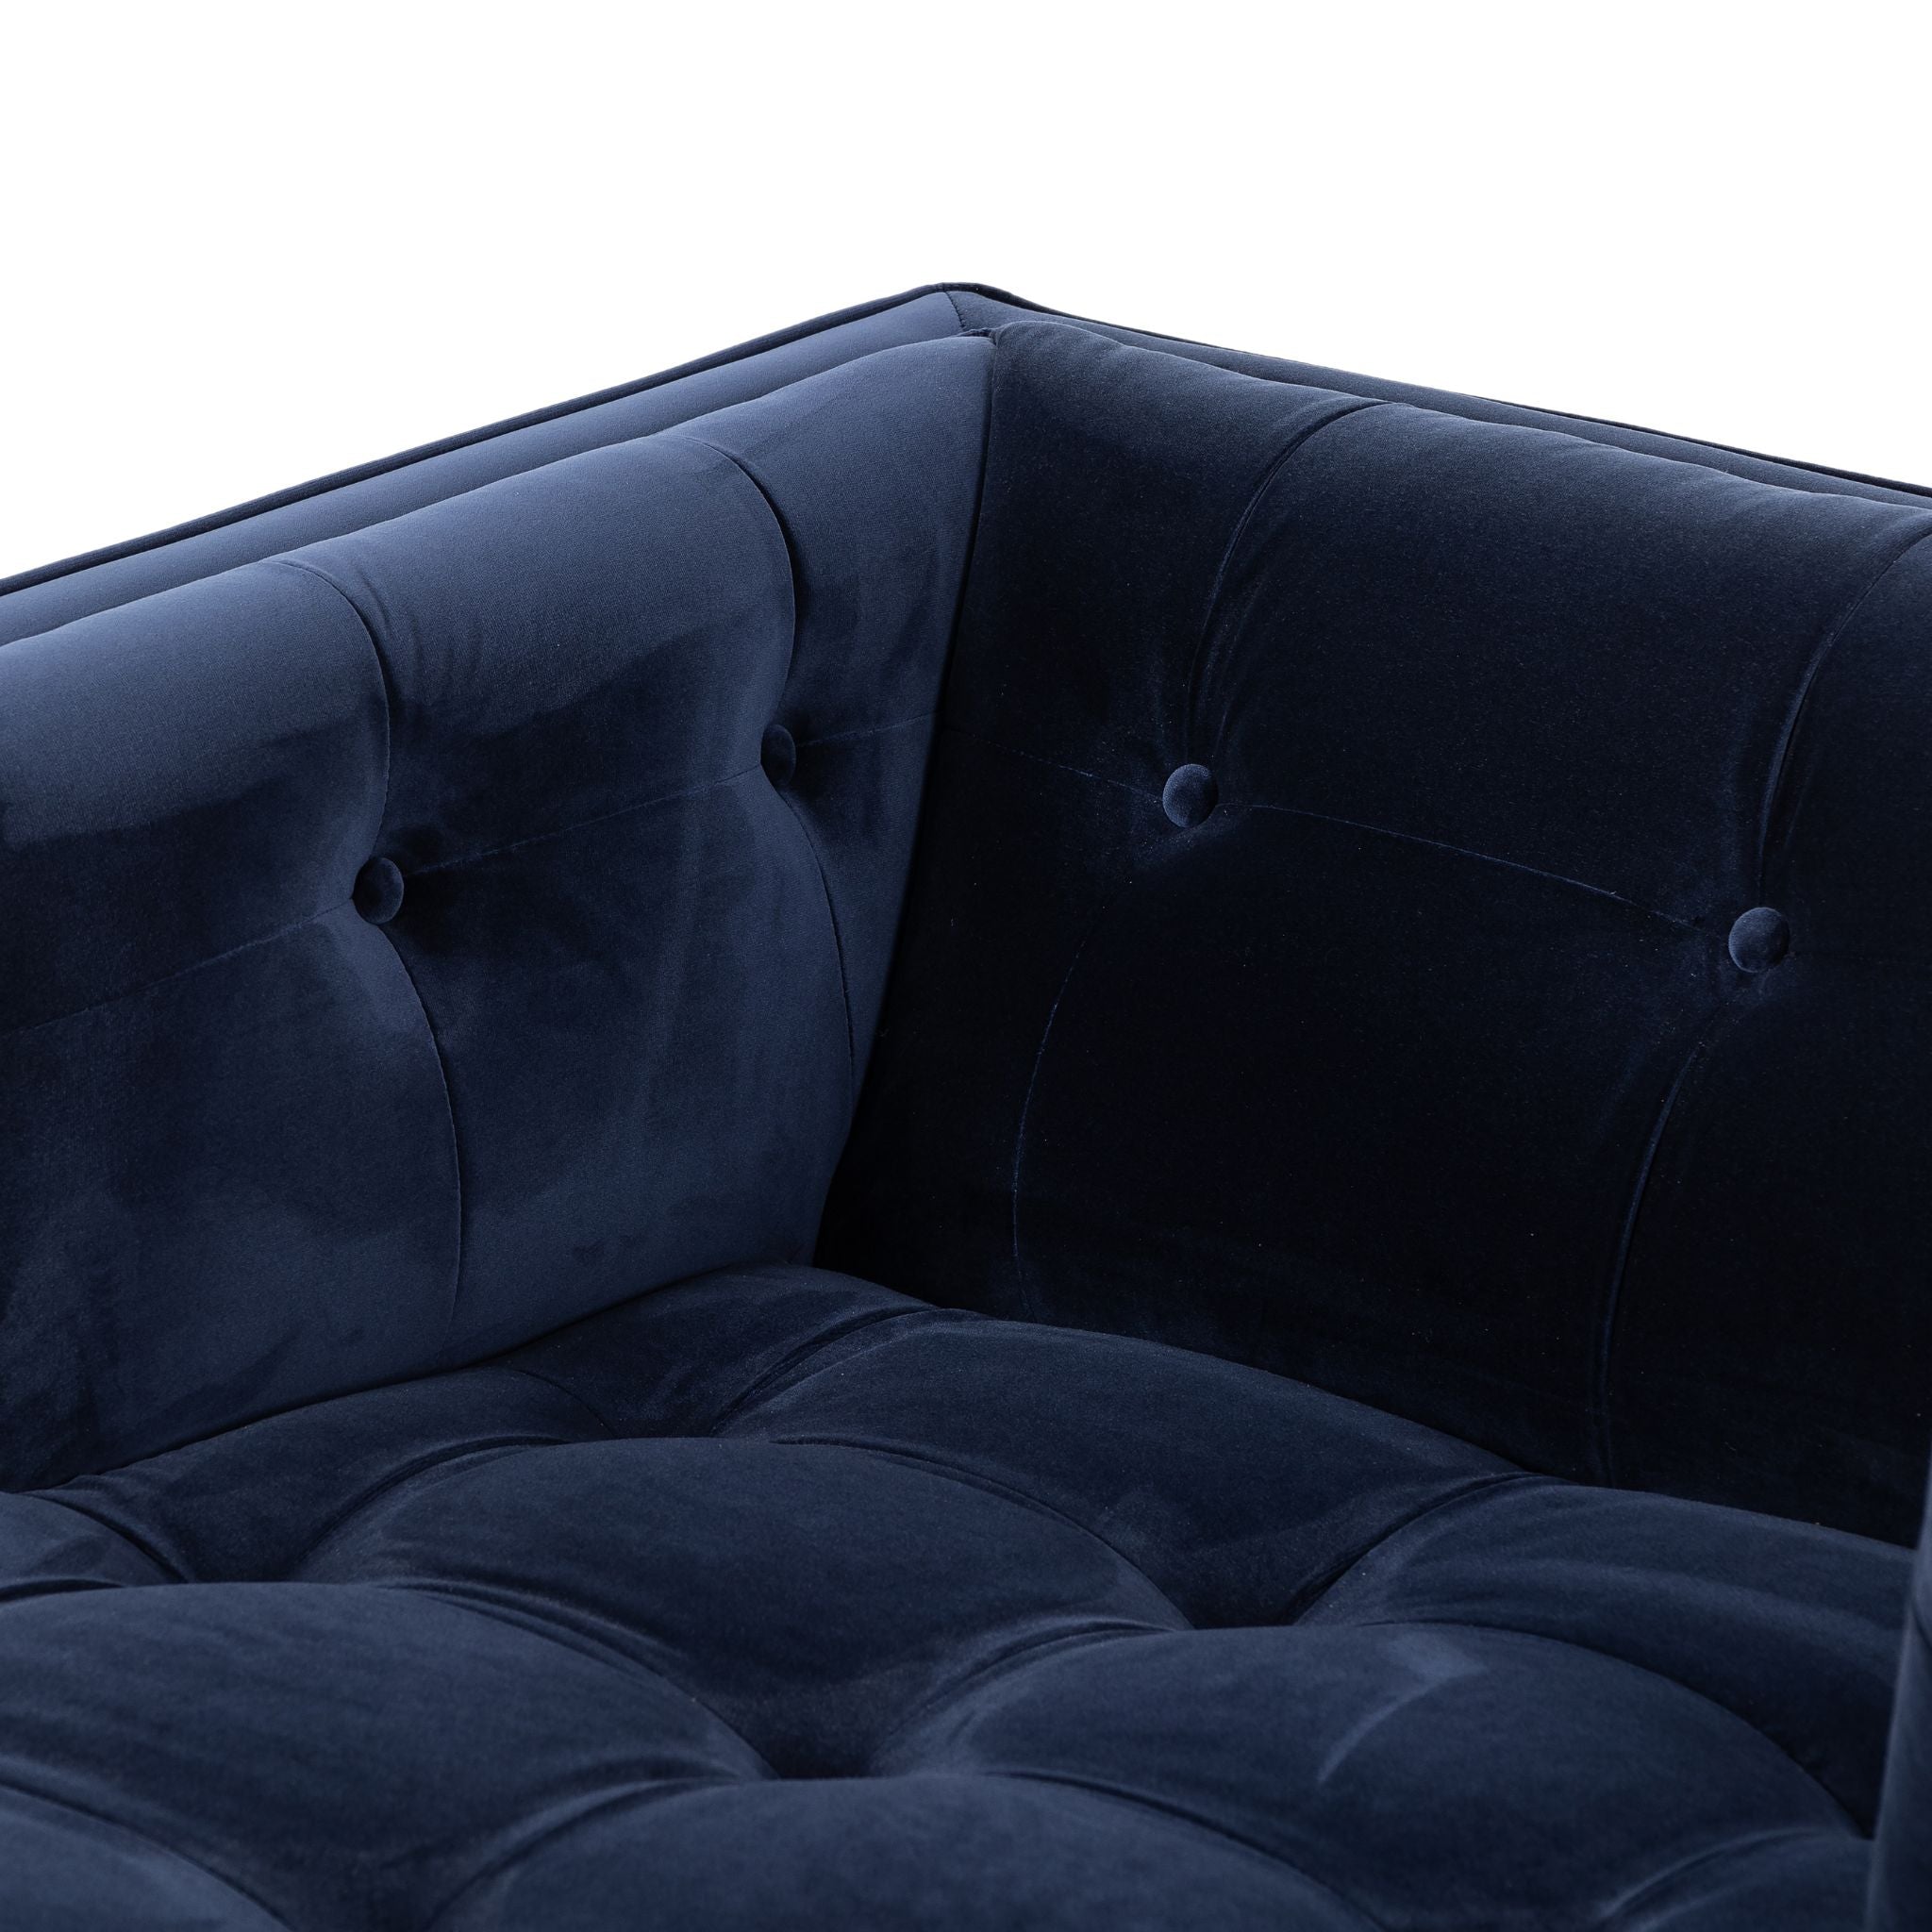 DYLAN CHAISE LOUNGE - NAVY